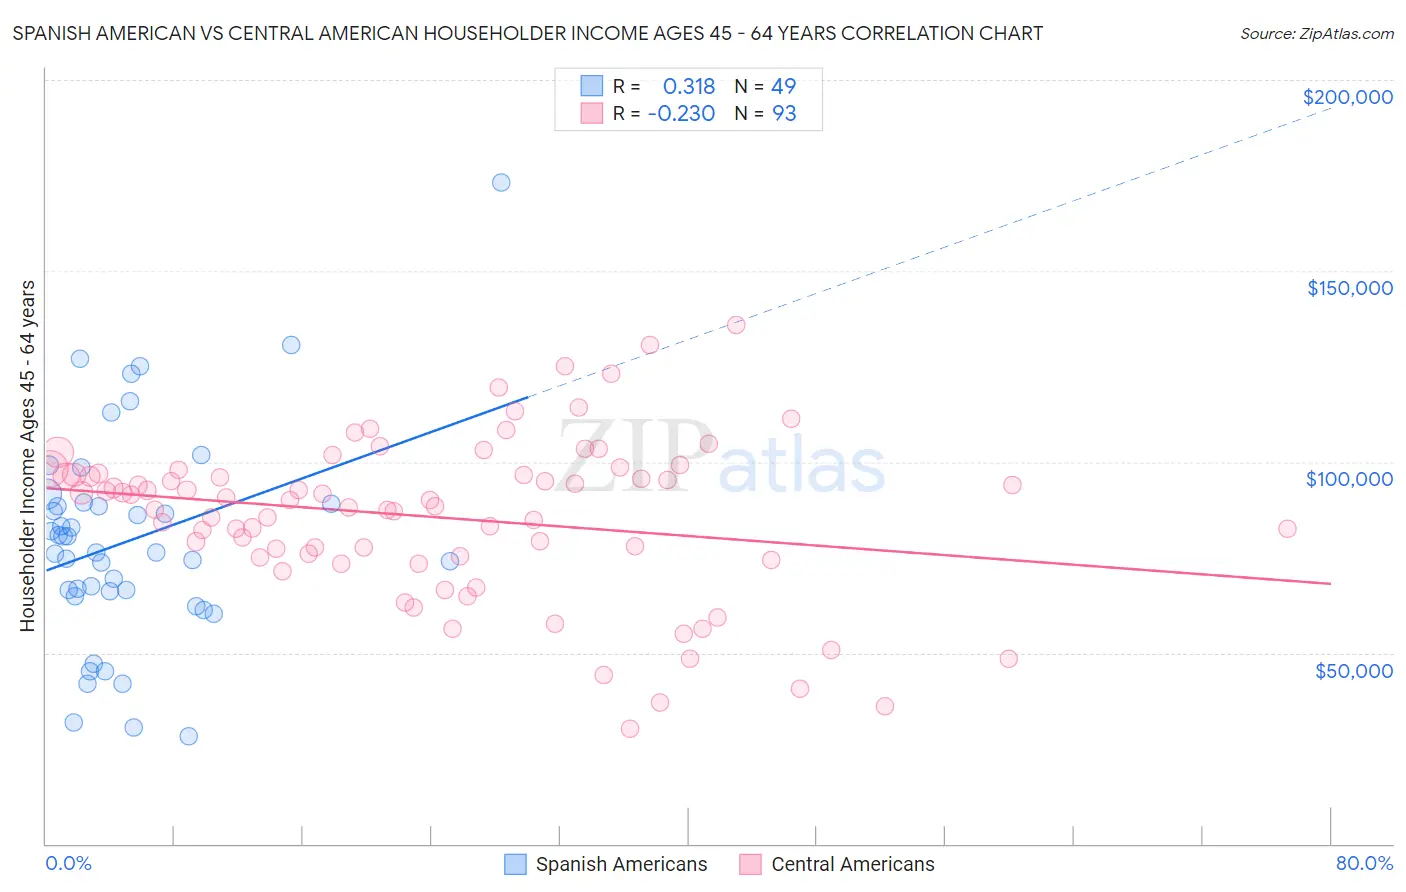 Spanish American vs Central American Householder Income Ages 45 - 64 years